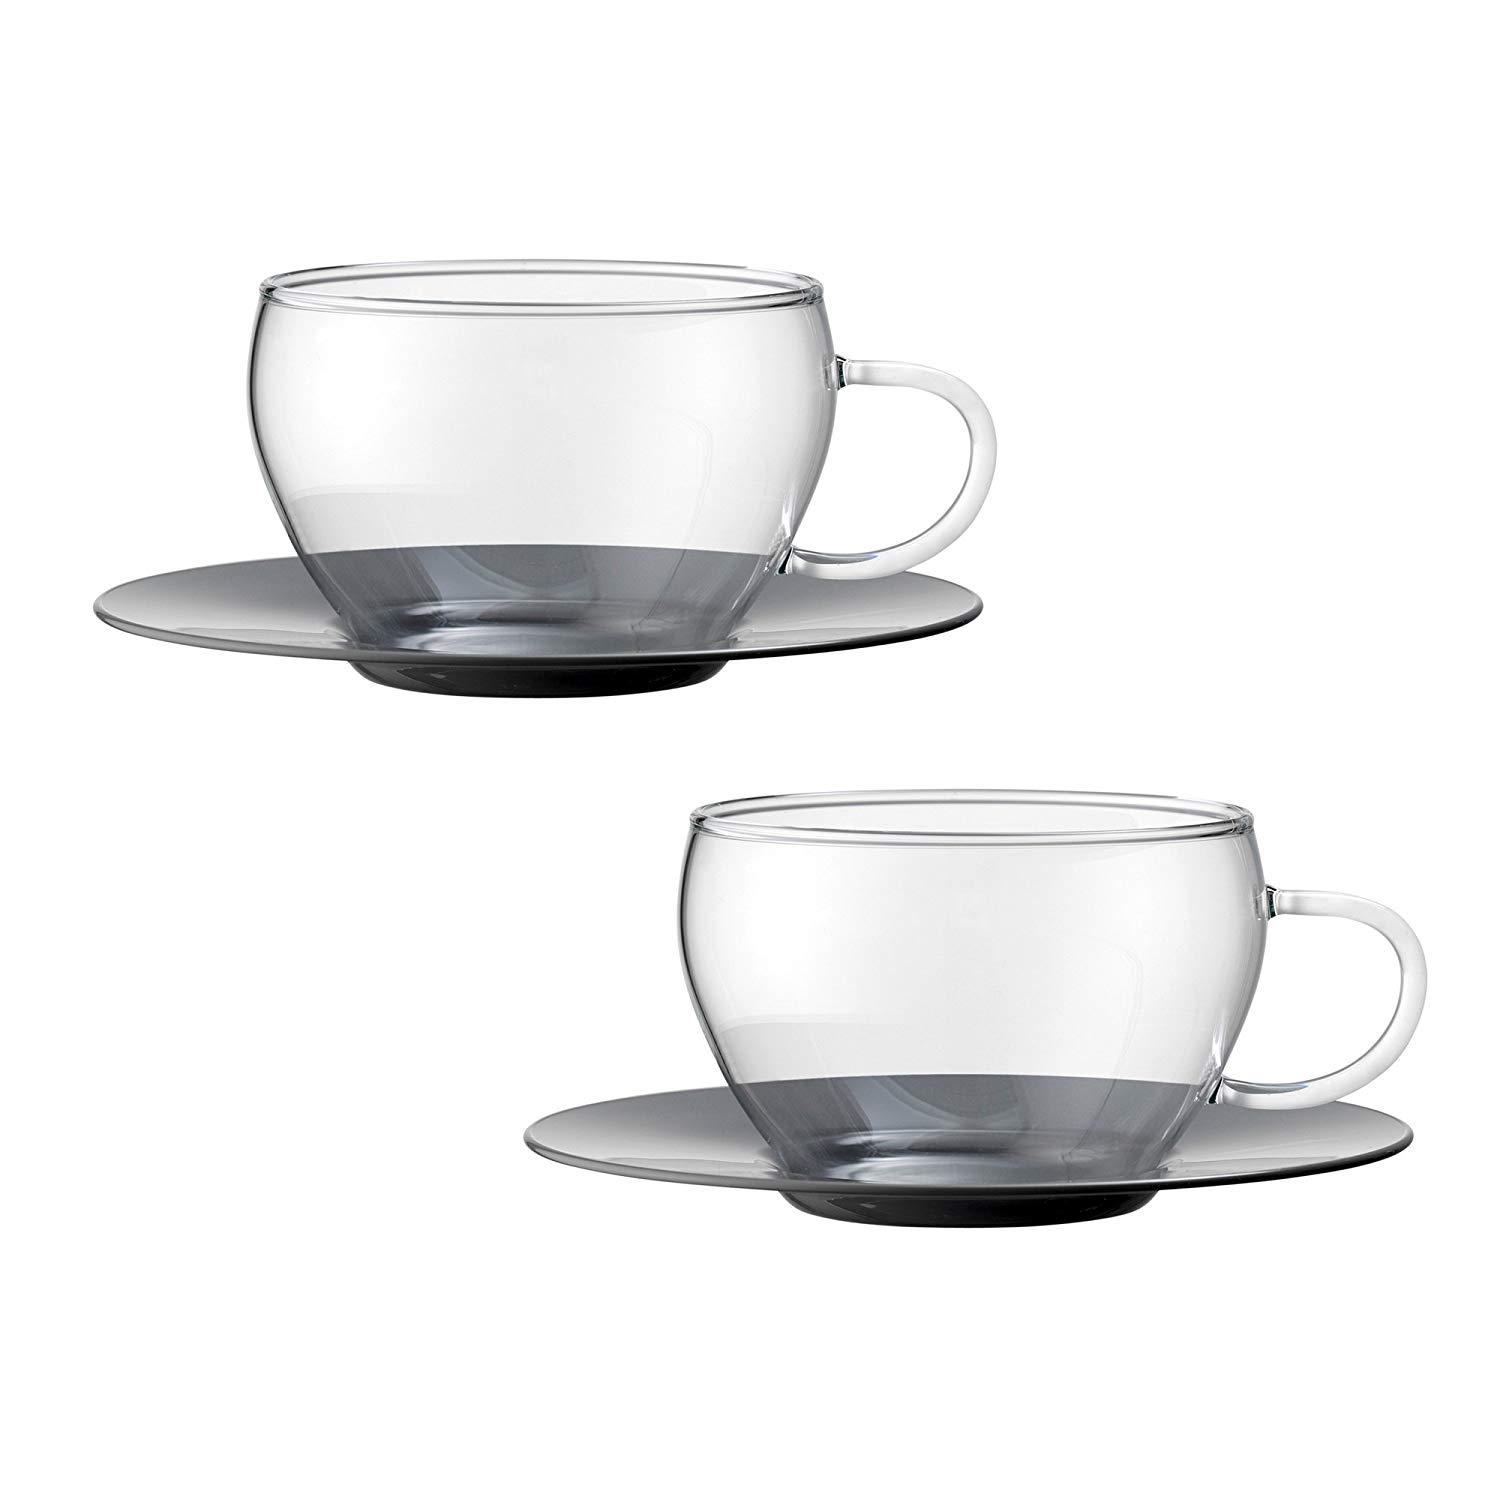 Bohemia Cristal 093 012 097 Play Of Colors Set Of 2 Plastic Saucer With Cof